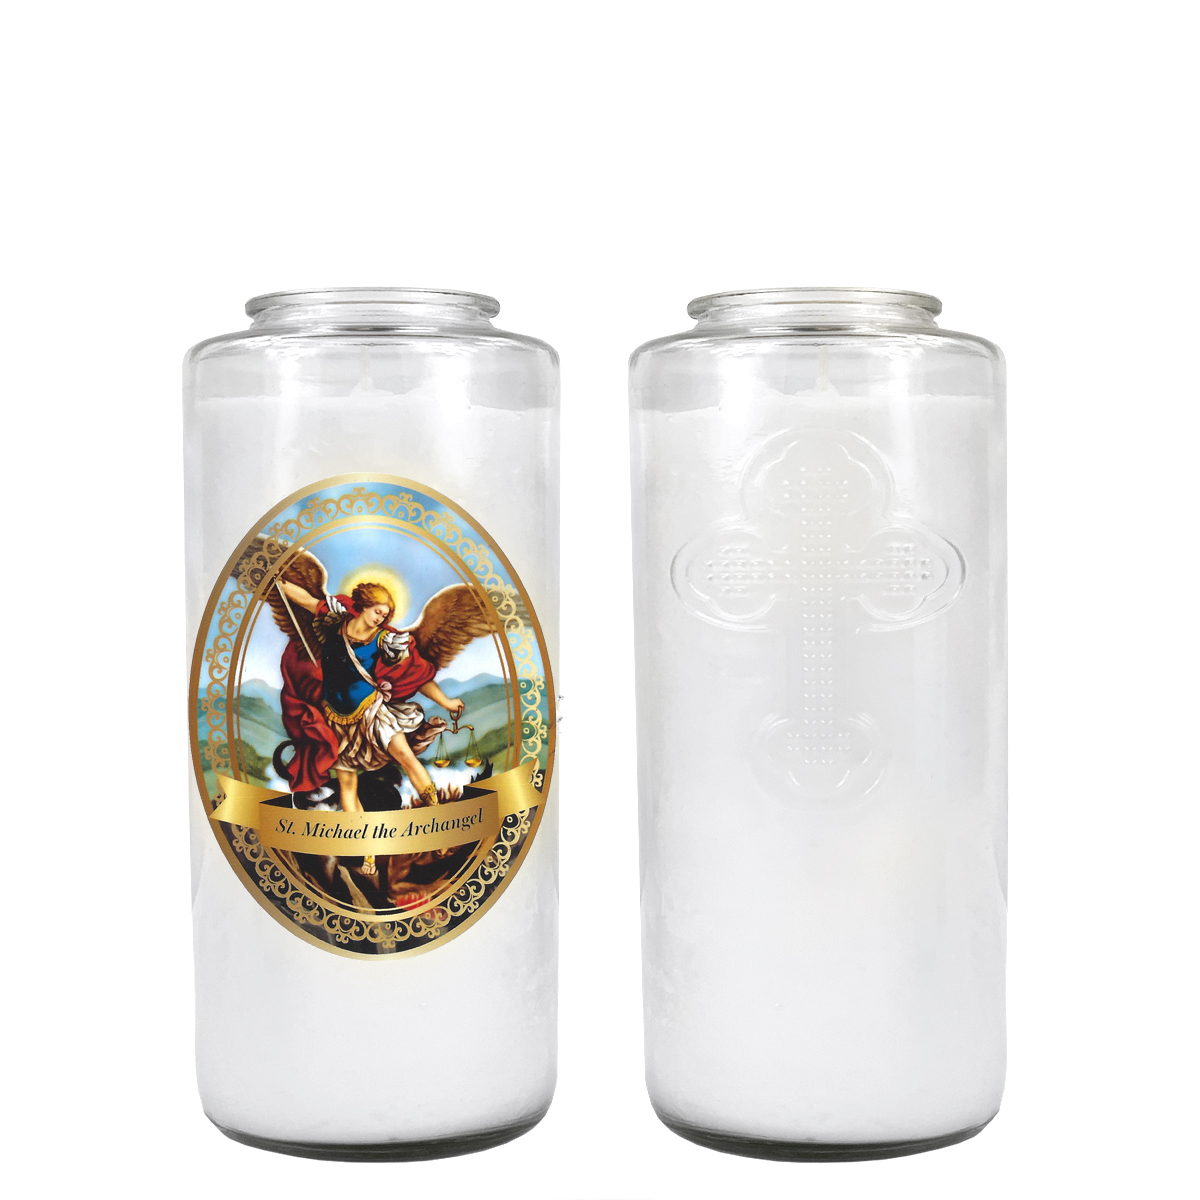 ST MICHAEL THE ARCHANGEL 3 DAY CANDLE W/ REMOVABLE LABEL